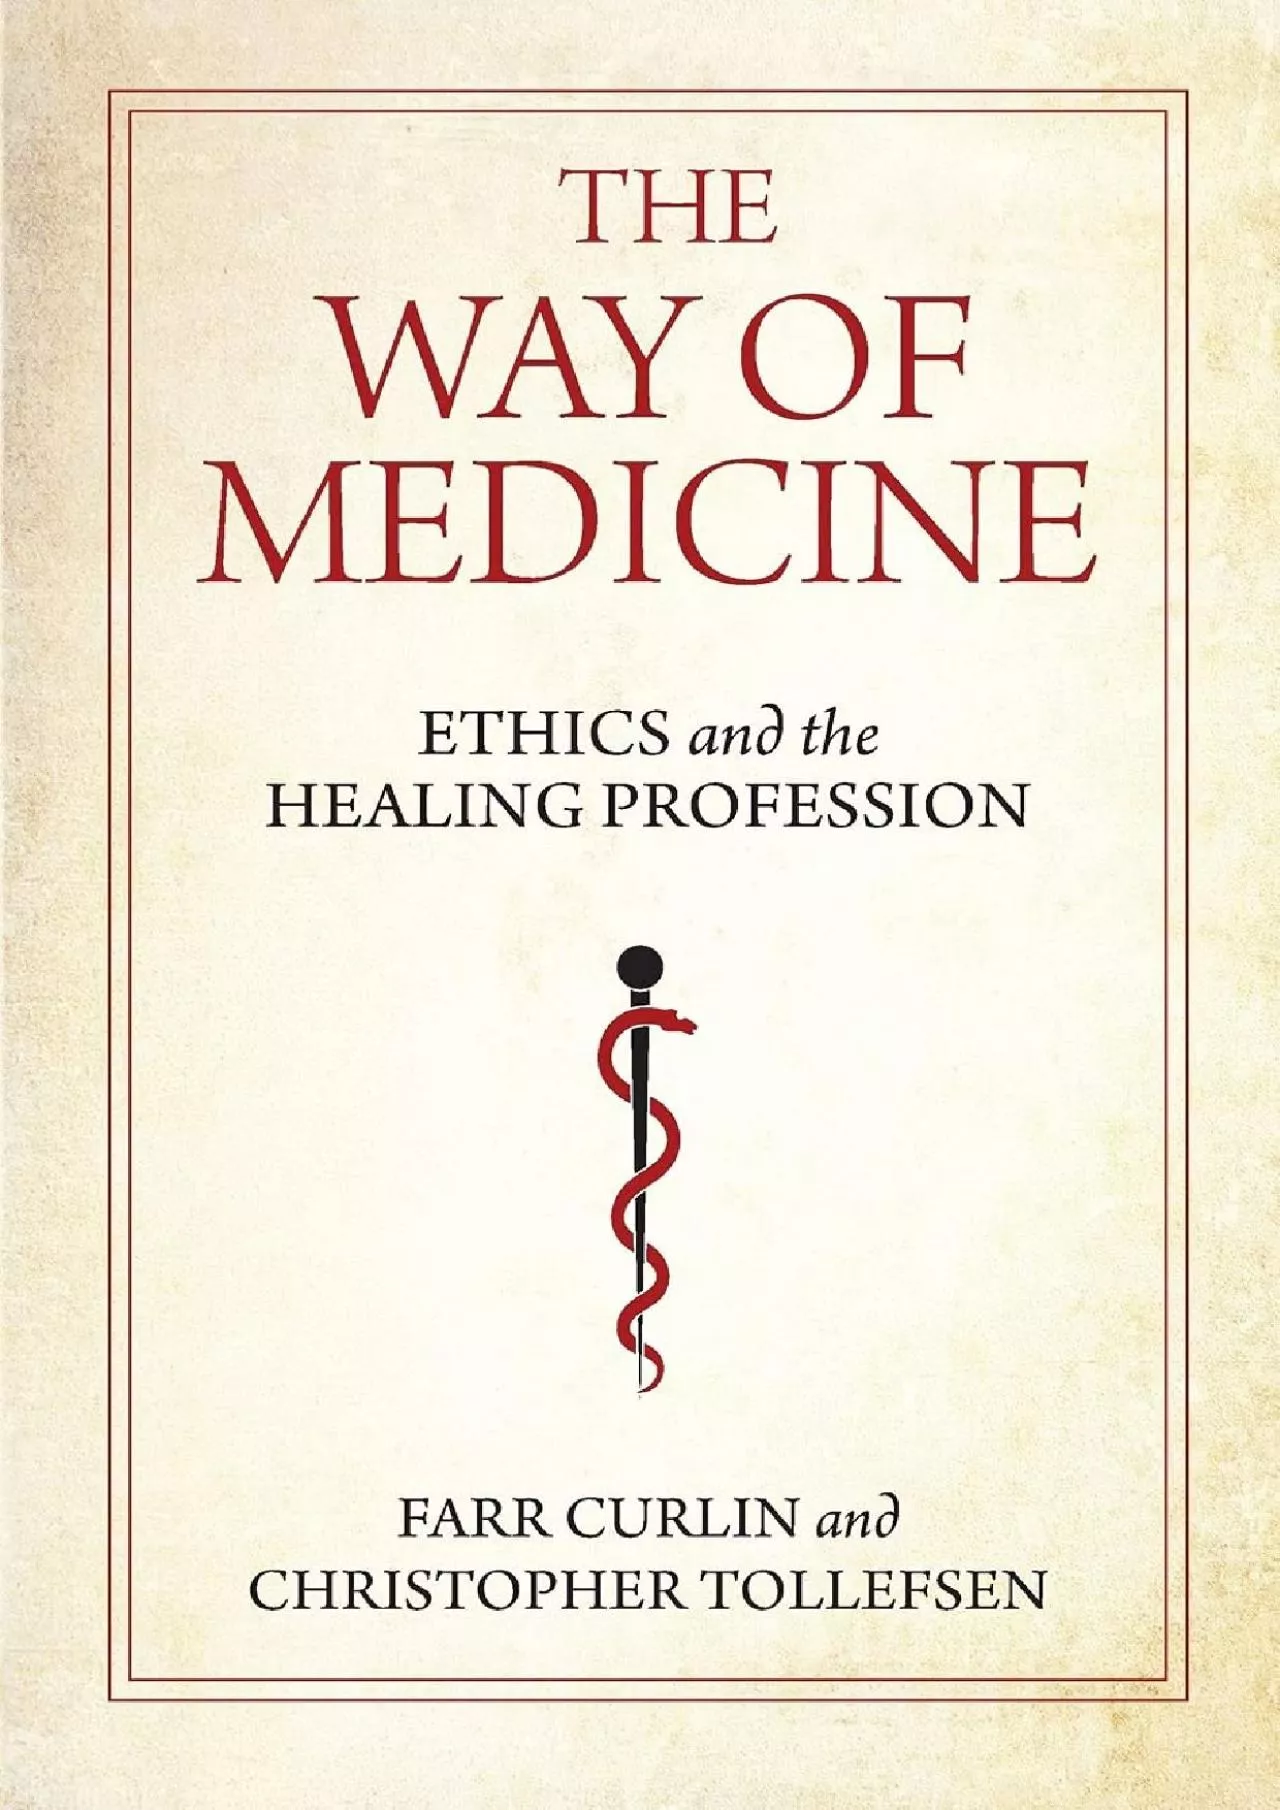 (BOOK)-The Way of Medicine: Ethics and the Healing Profession (Notre Dame Studies in Medical